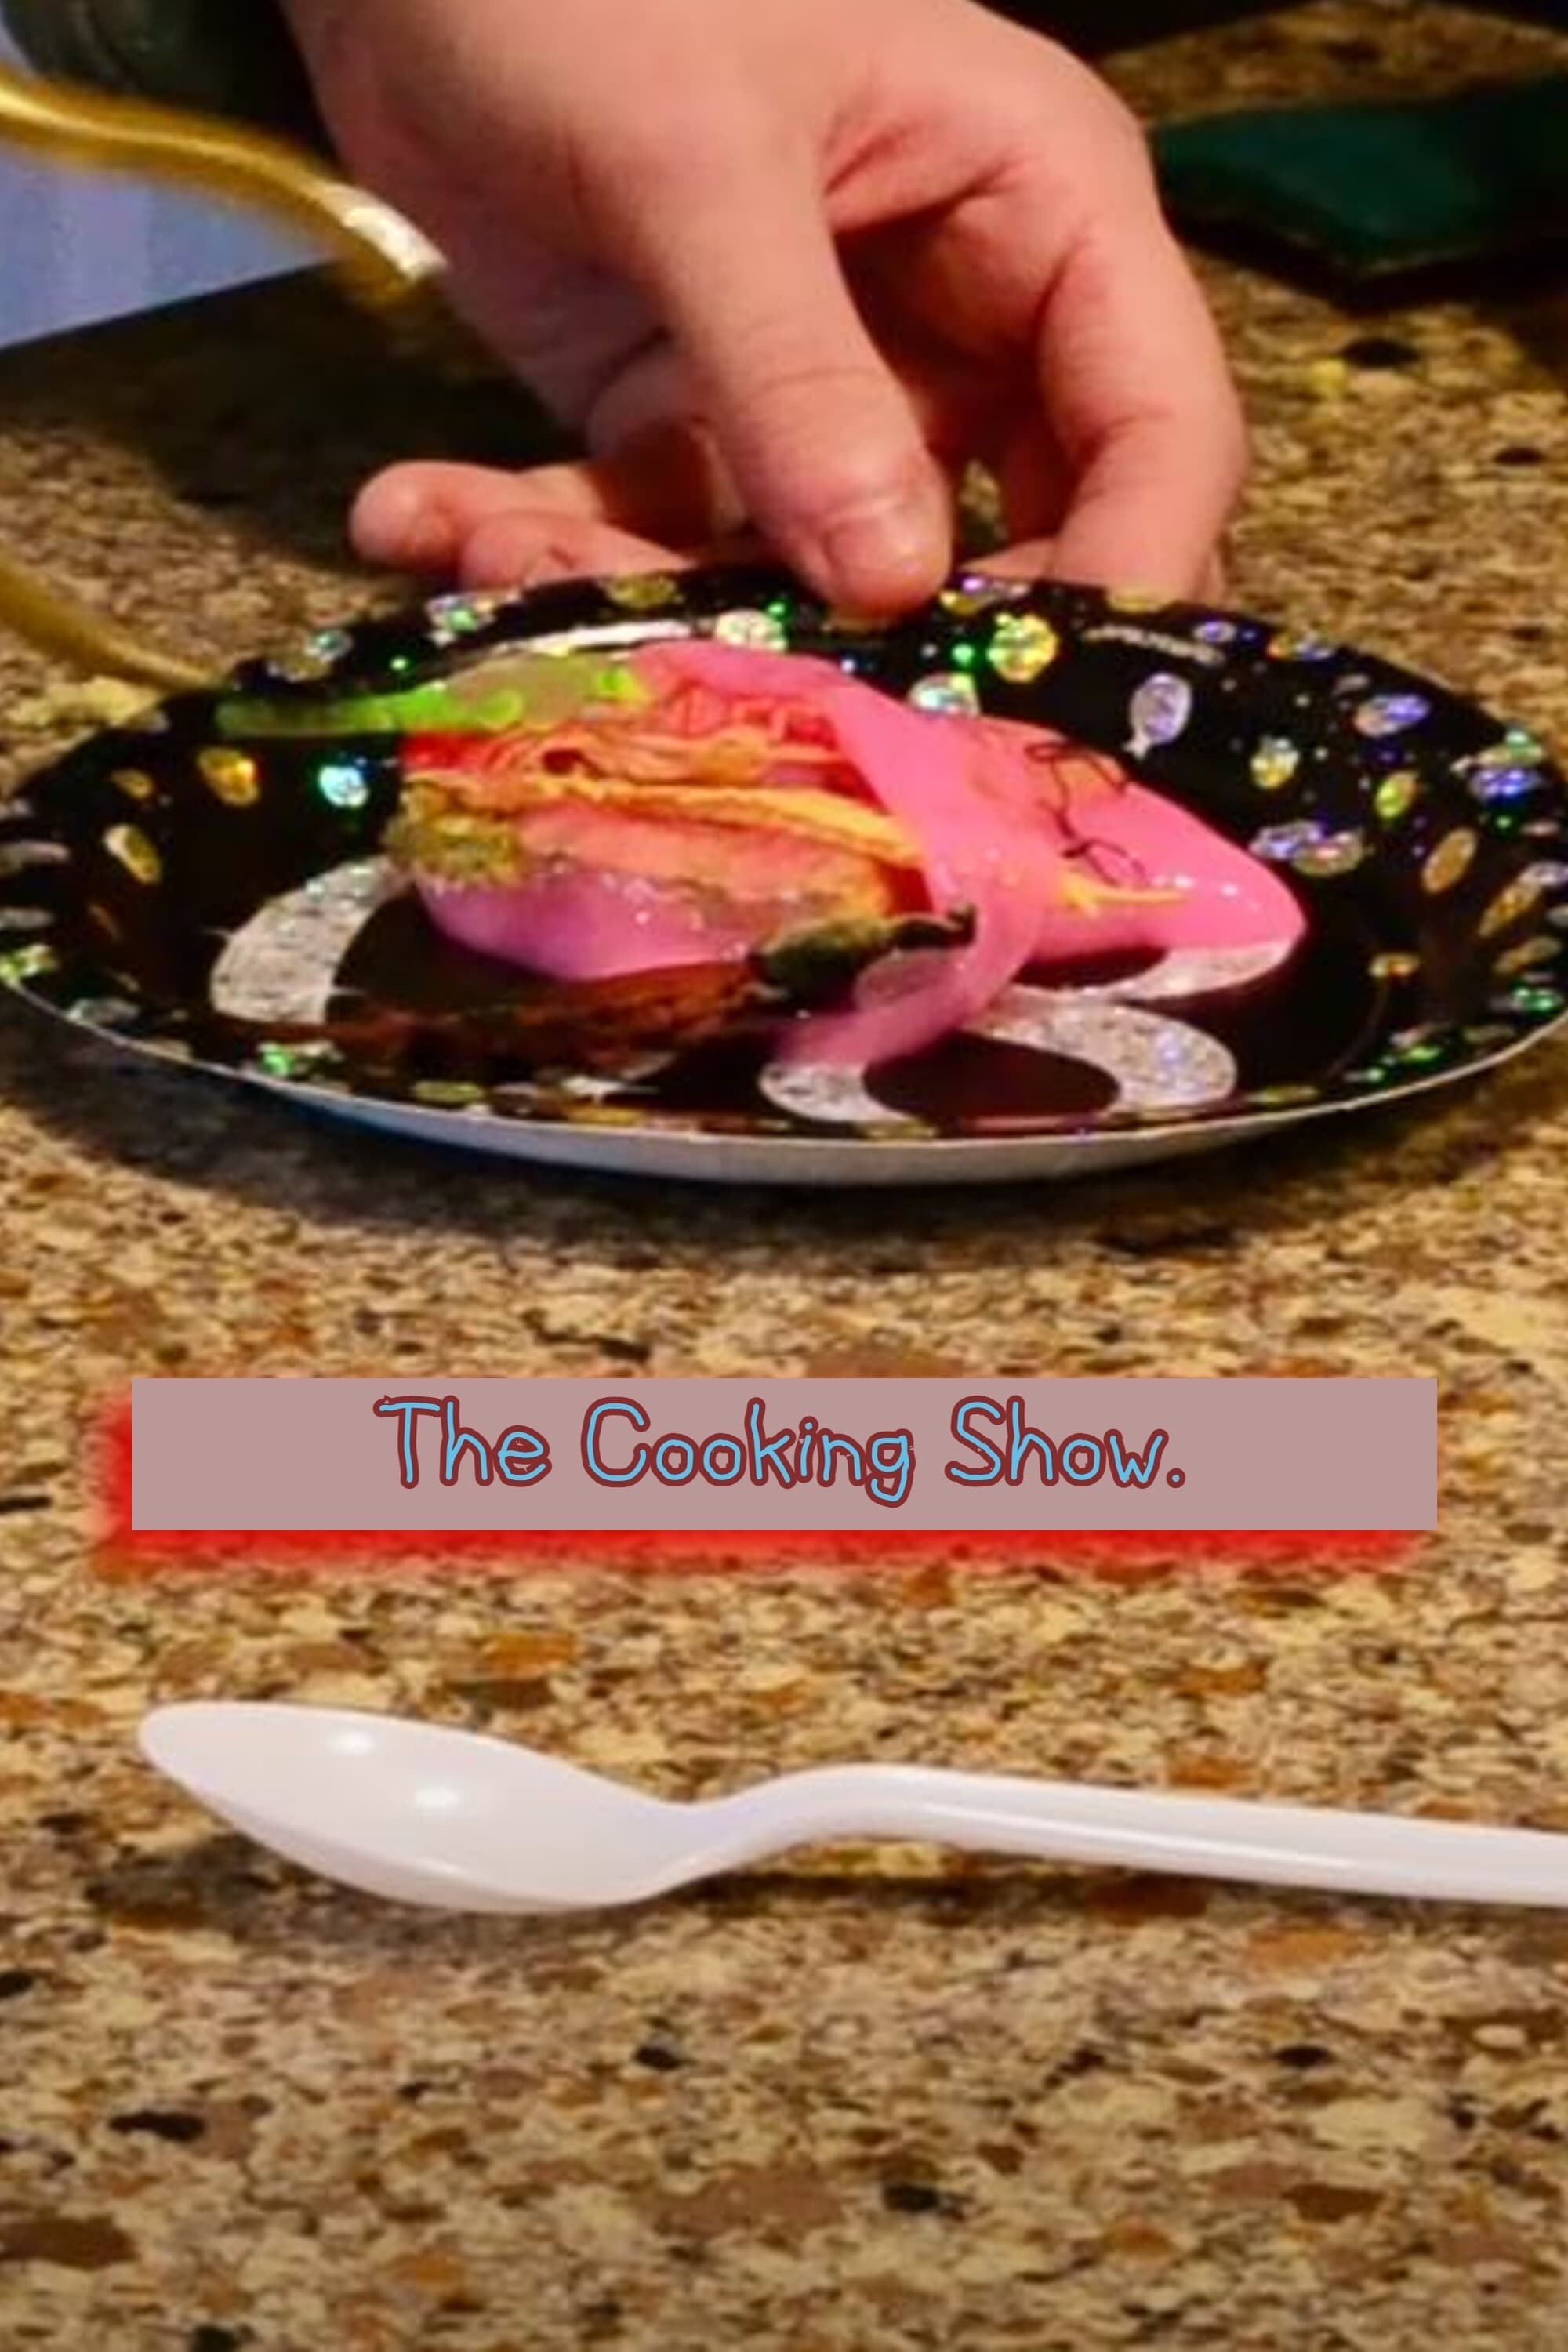 The Cooking Show.